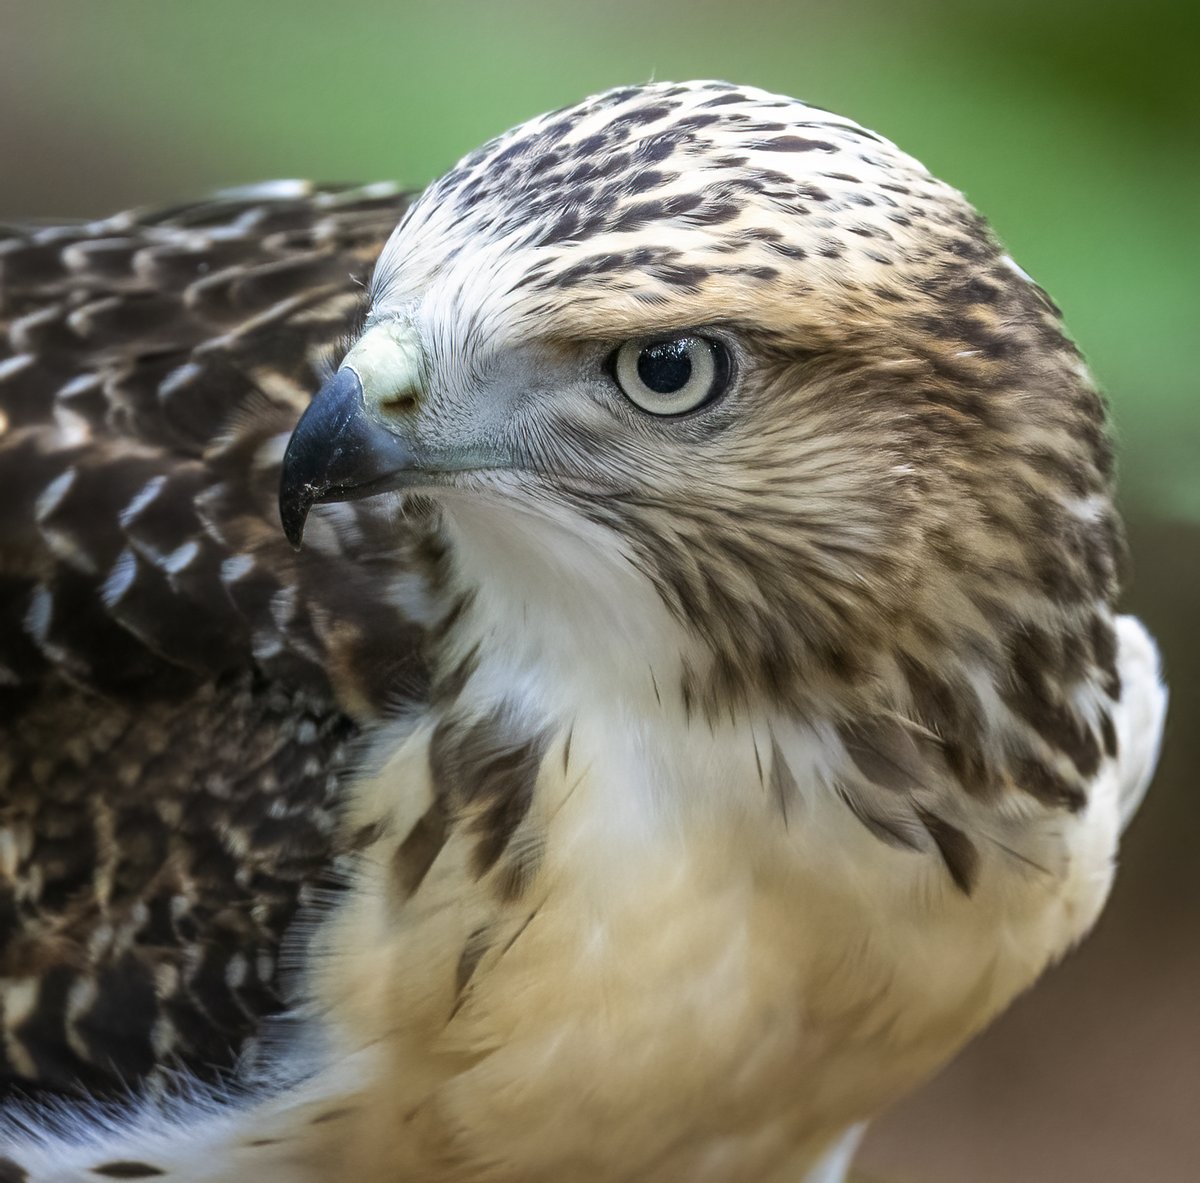 A young Red-tailed Hawk that was exploring the world outside of the nest.